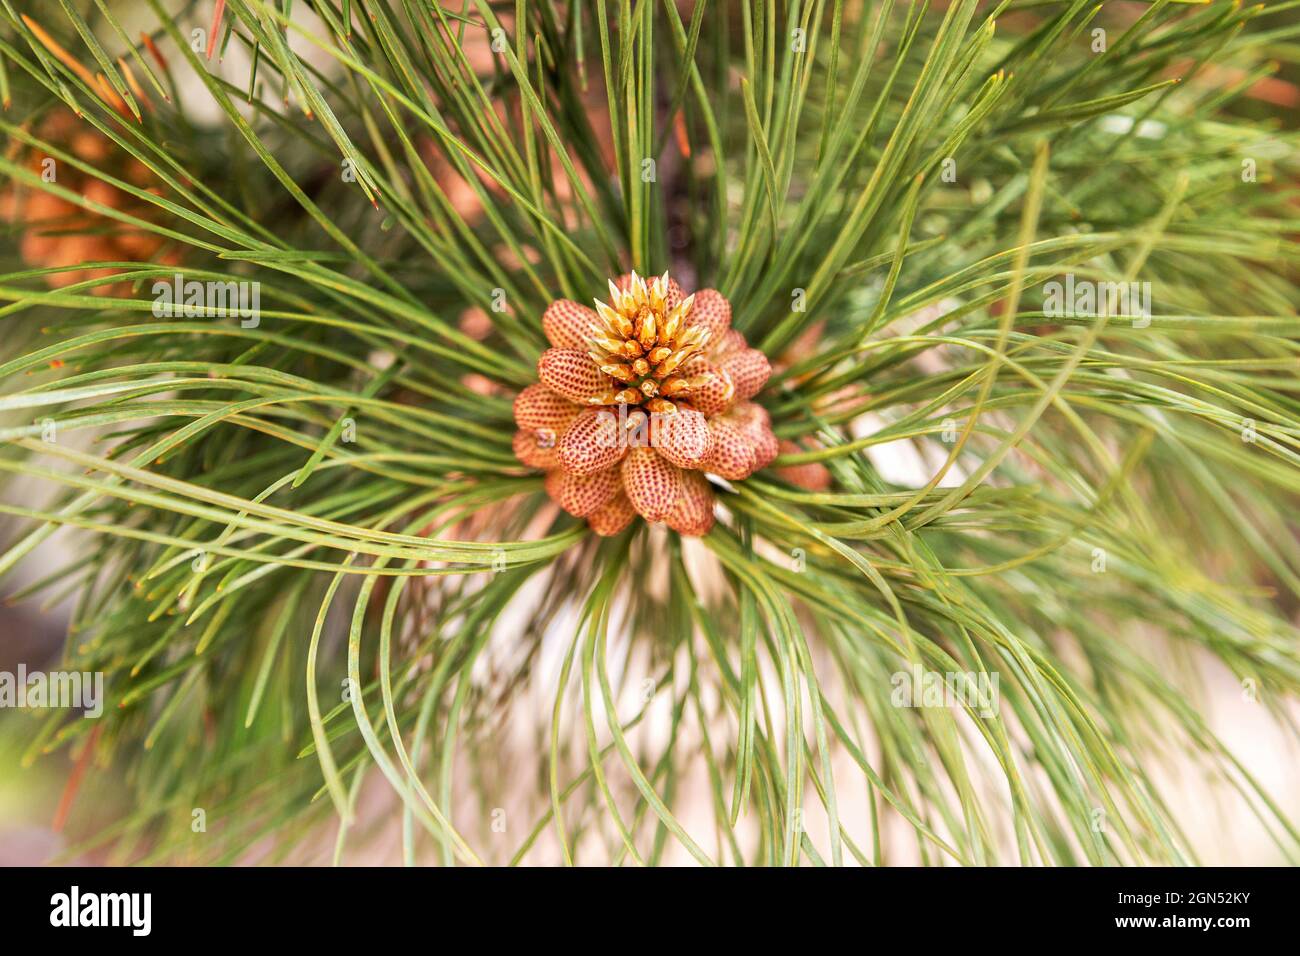 Close Up of New Pine Cone on Ponderosa Pine. Pine tree branch with new pine cone and radiating needles closeup Stock Photo